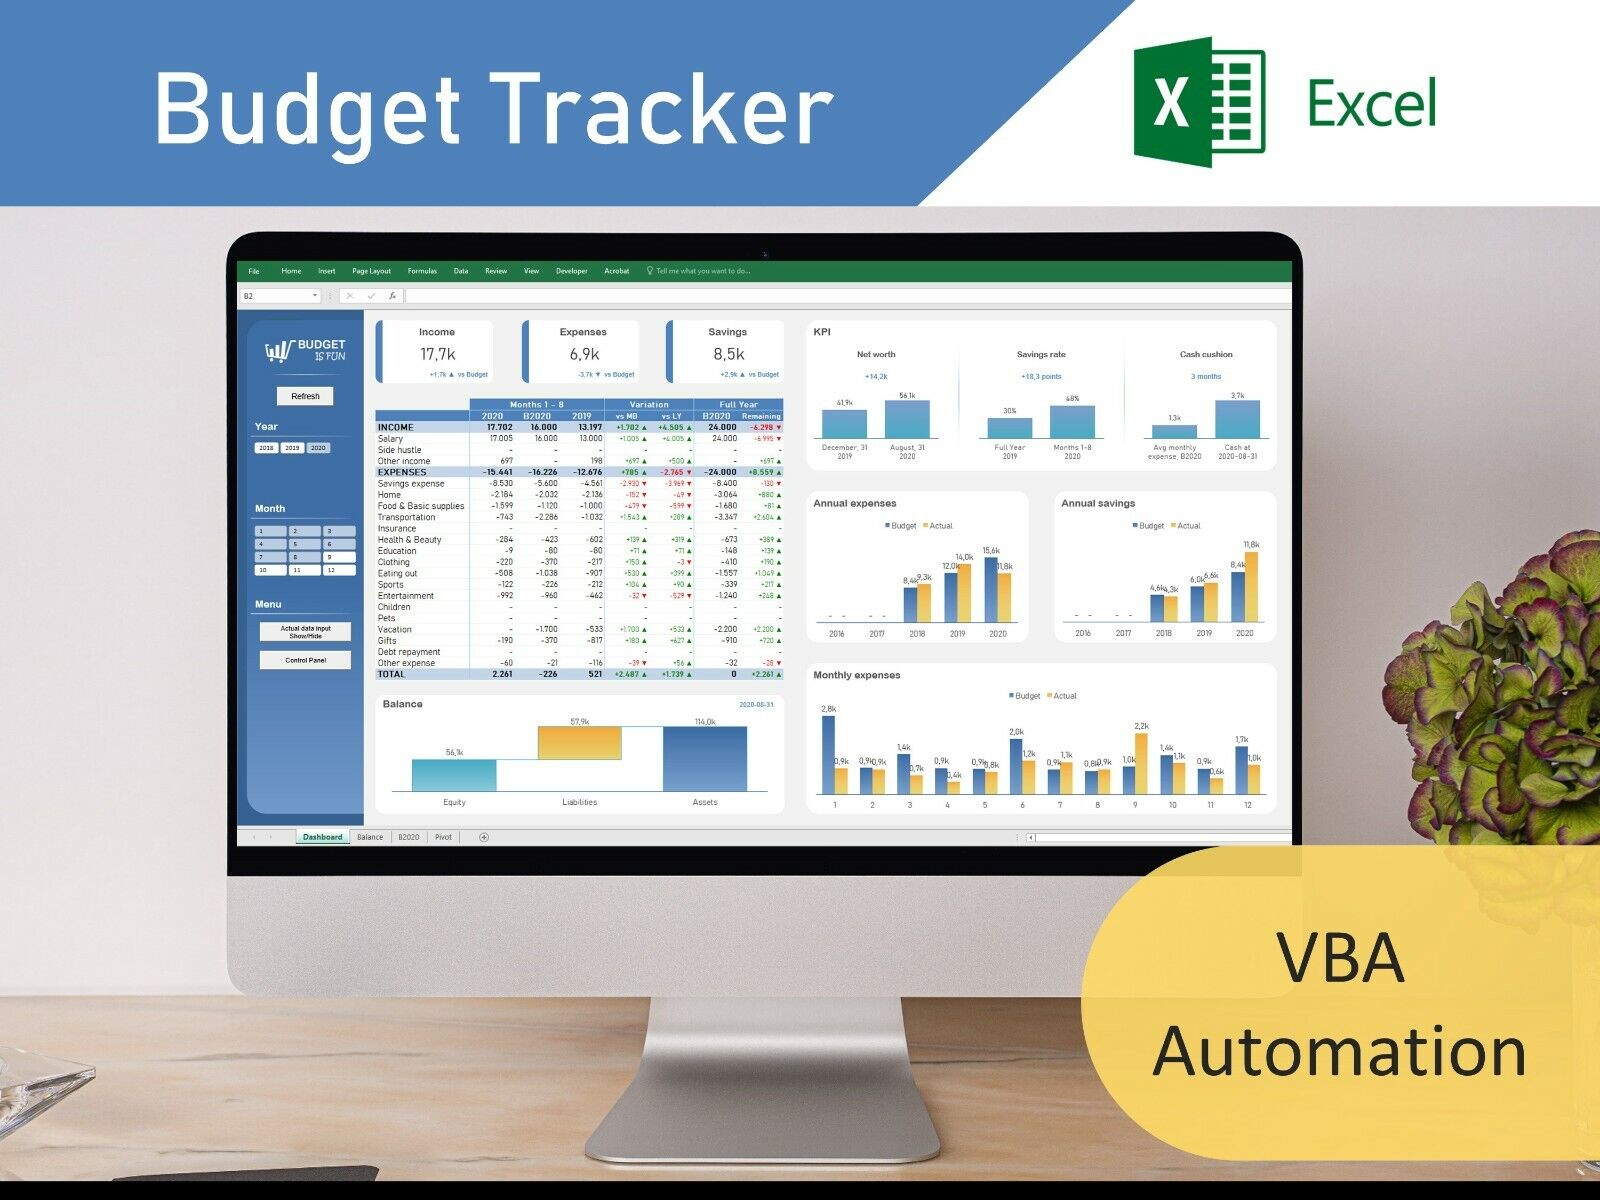 Excel Budget Template | Personal Finance Spreadsheet | Monthly Budget Tracker